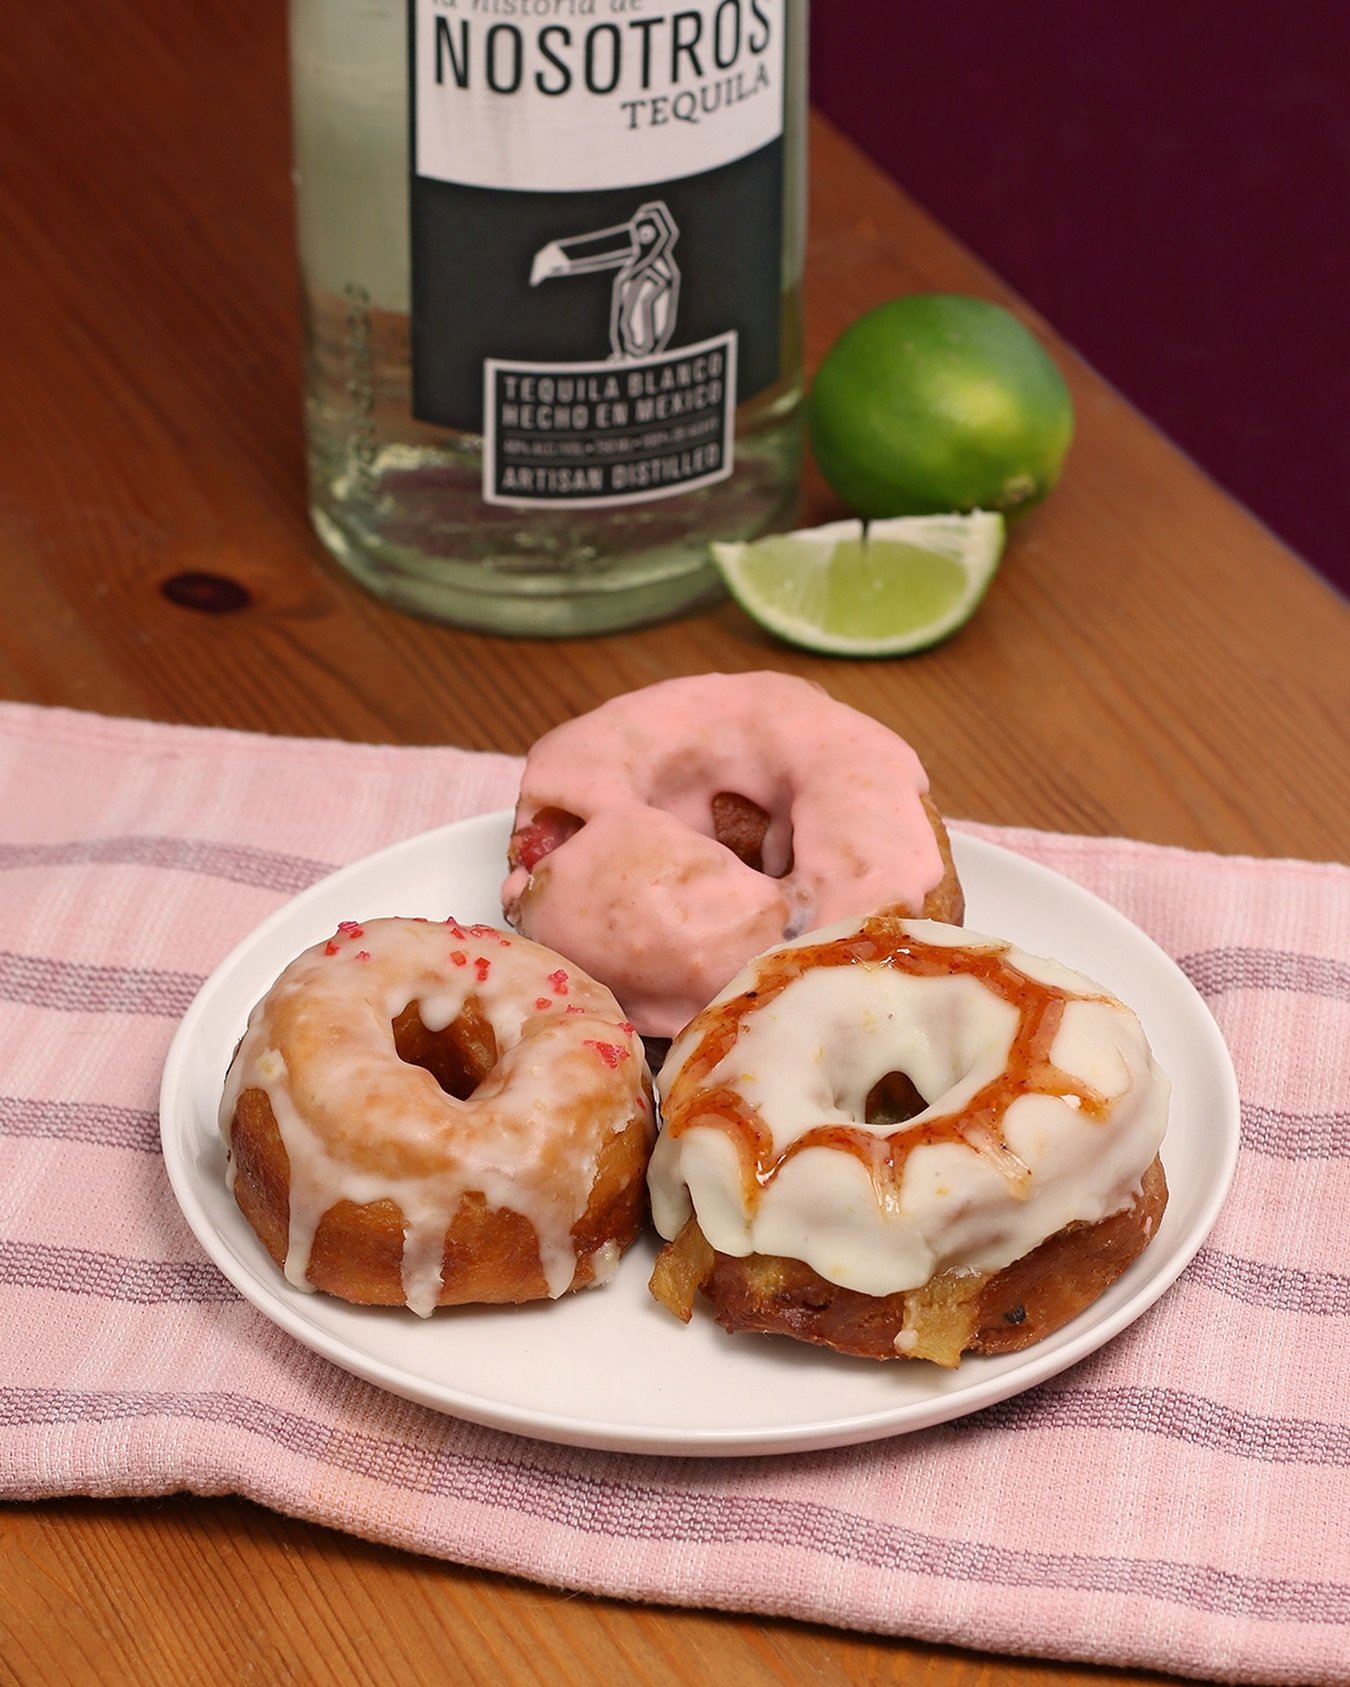 Happy Cinco de Mayo! 

We&rsquo;re selling our Mezcal Donut Flights today!

🍓Strawberry Margarita - Fresh strawberries folded into an orange zest dough. Dipped in a strawberry tequila glaze.

🥓 Bacon Matador - Juicy pineapple and savory bacon dough